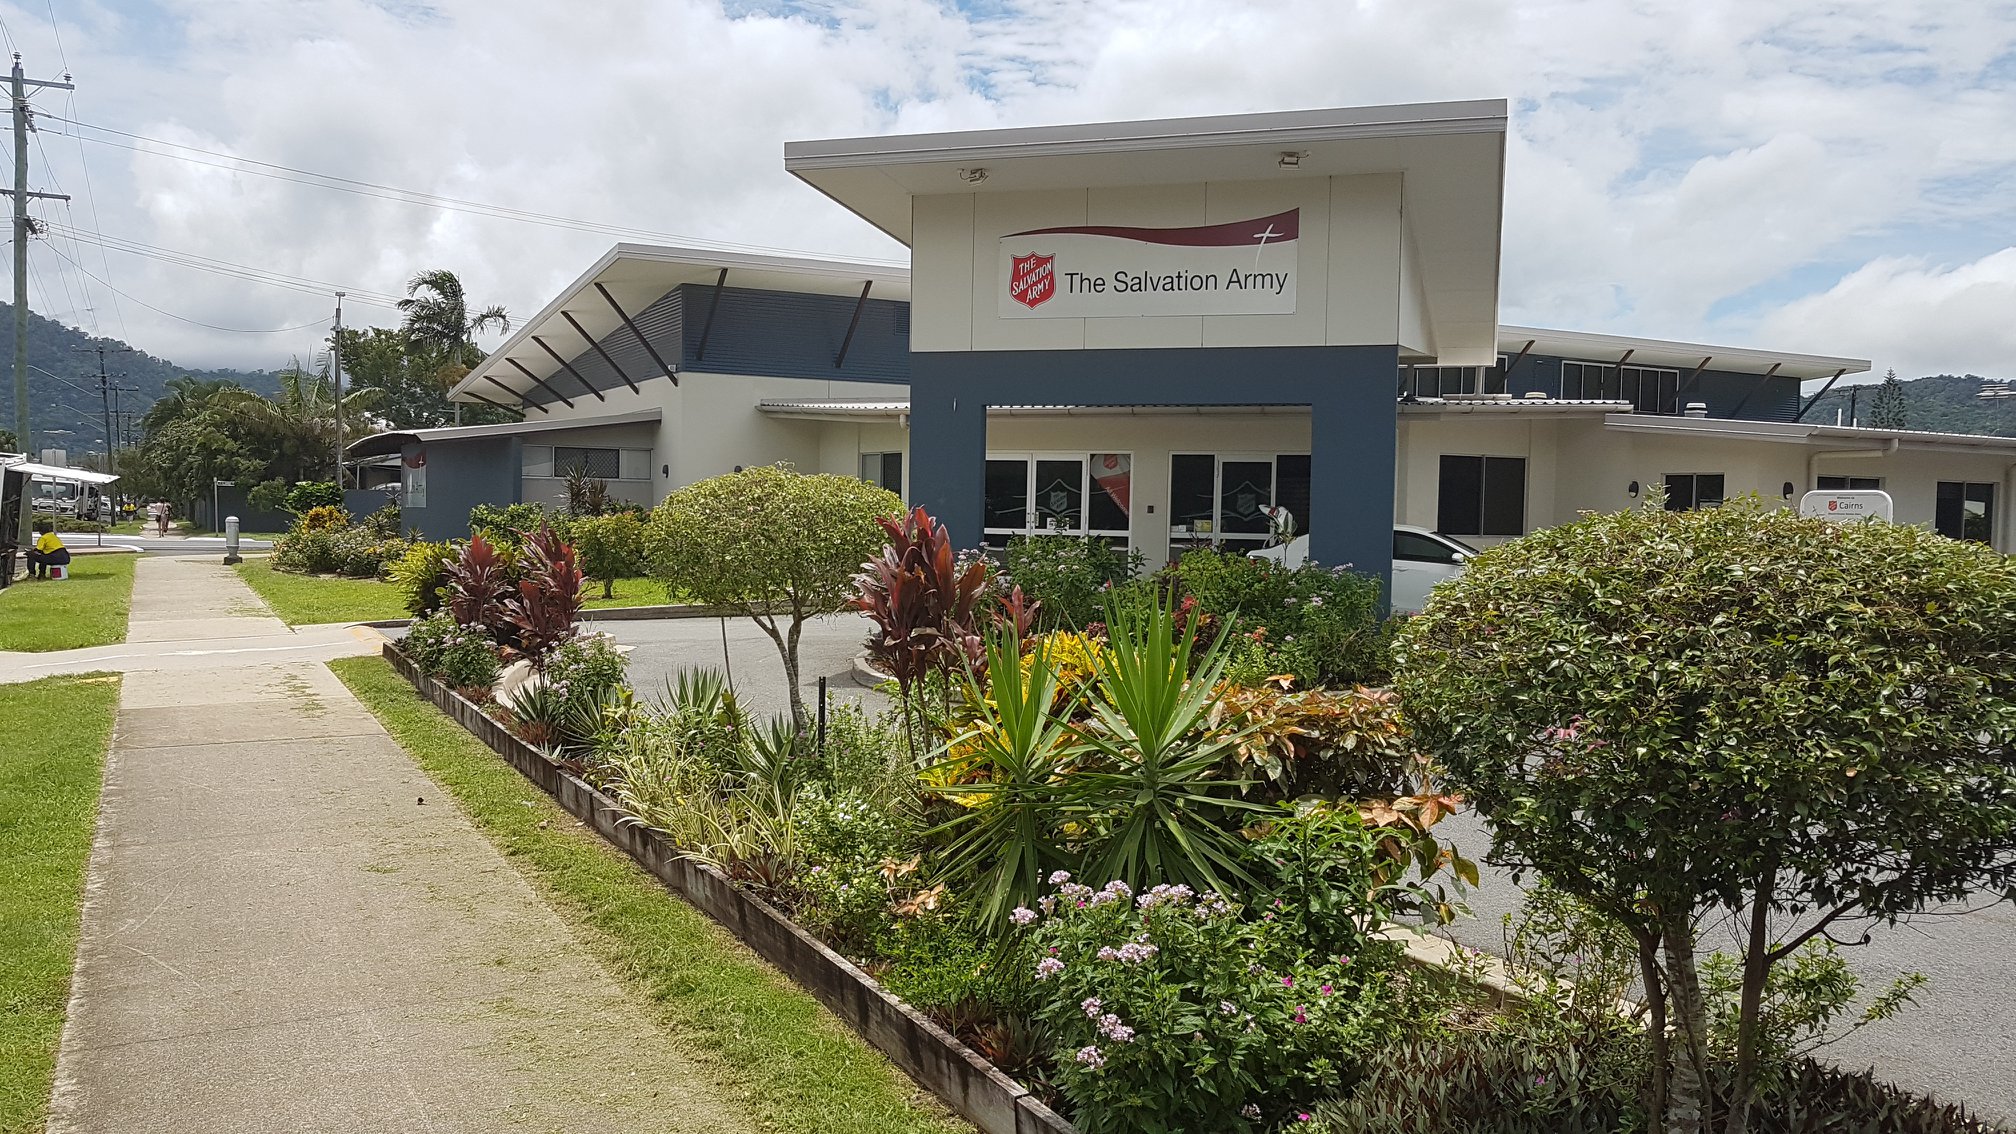 Salvation Army Cairns